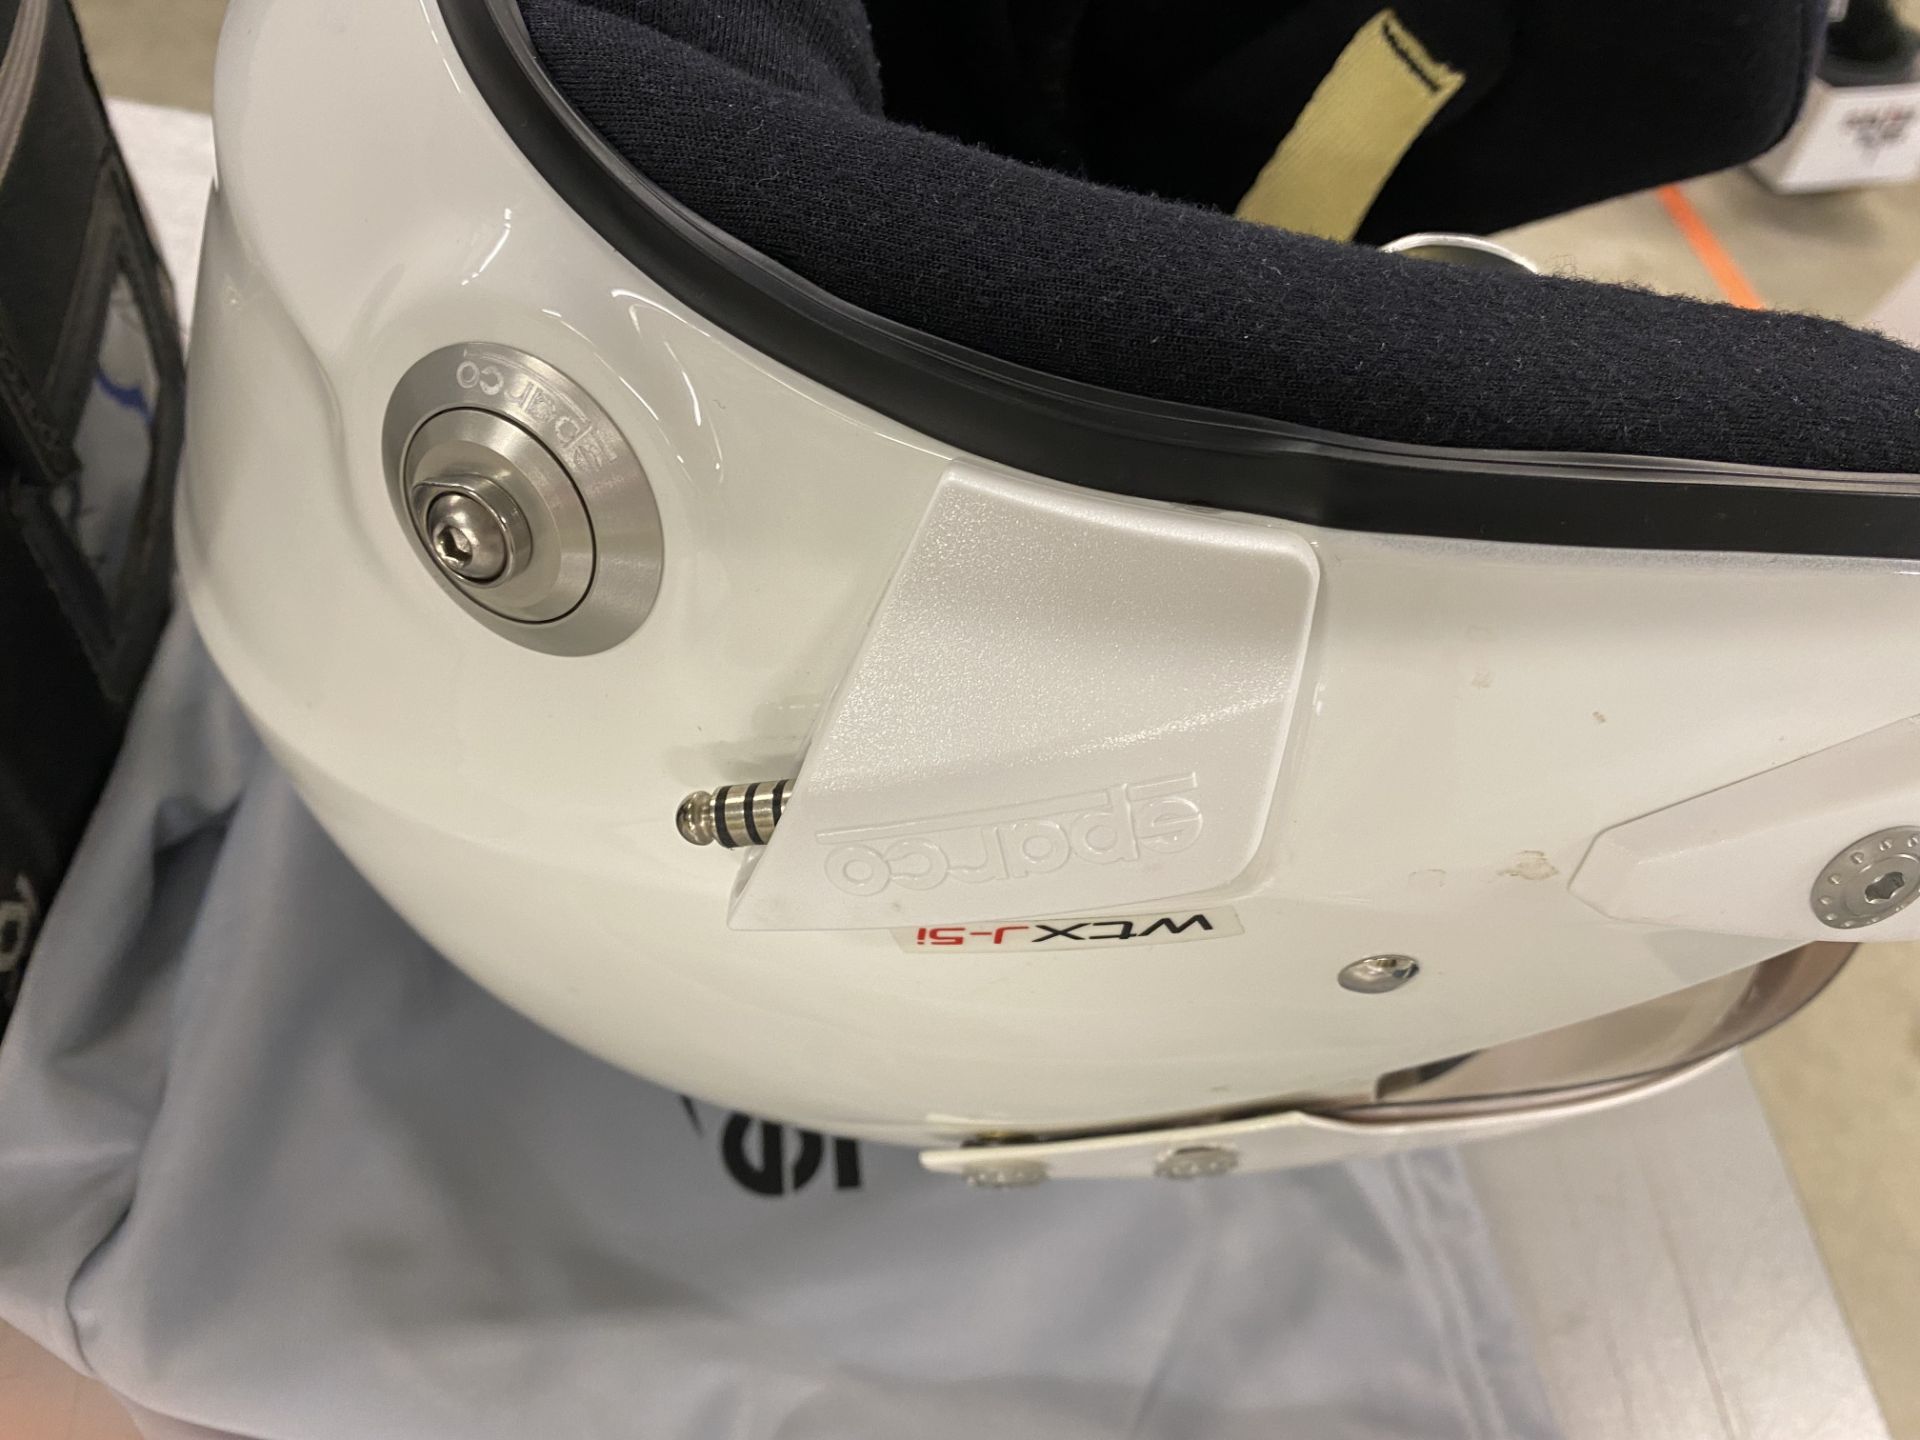 Sparco WTXJ-5i open face racing helmet with microphone and connector with cover and storage bag size - Image 4 of 6